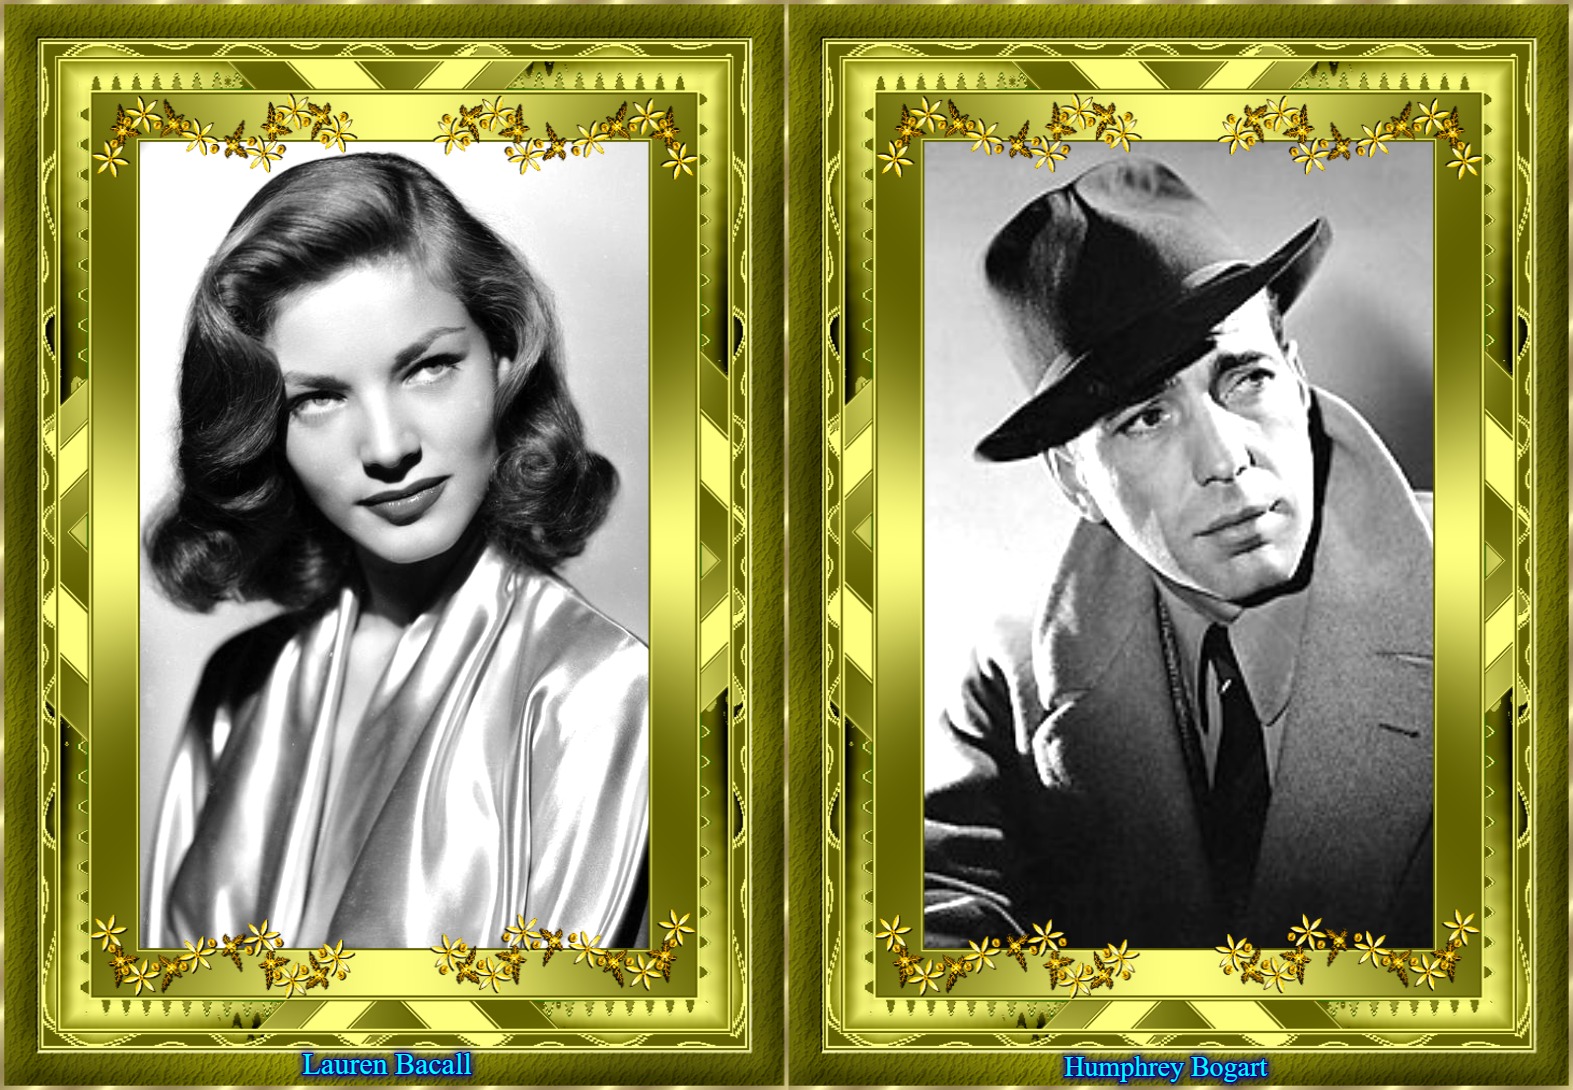 Read more about the article “Lauren Bacall-The Sultry Hollywood Diva”